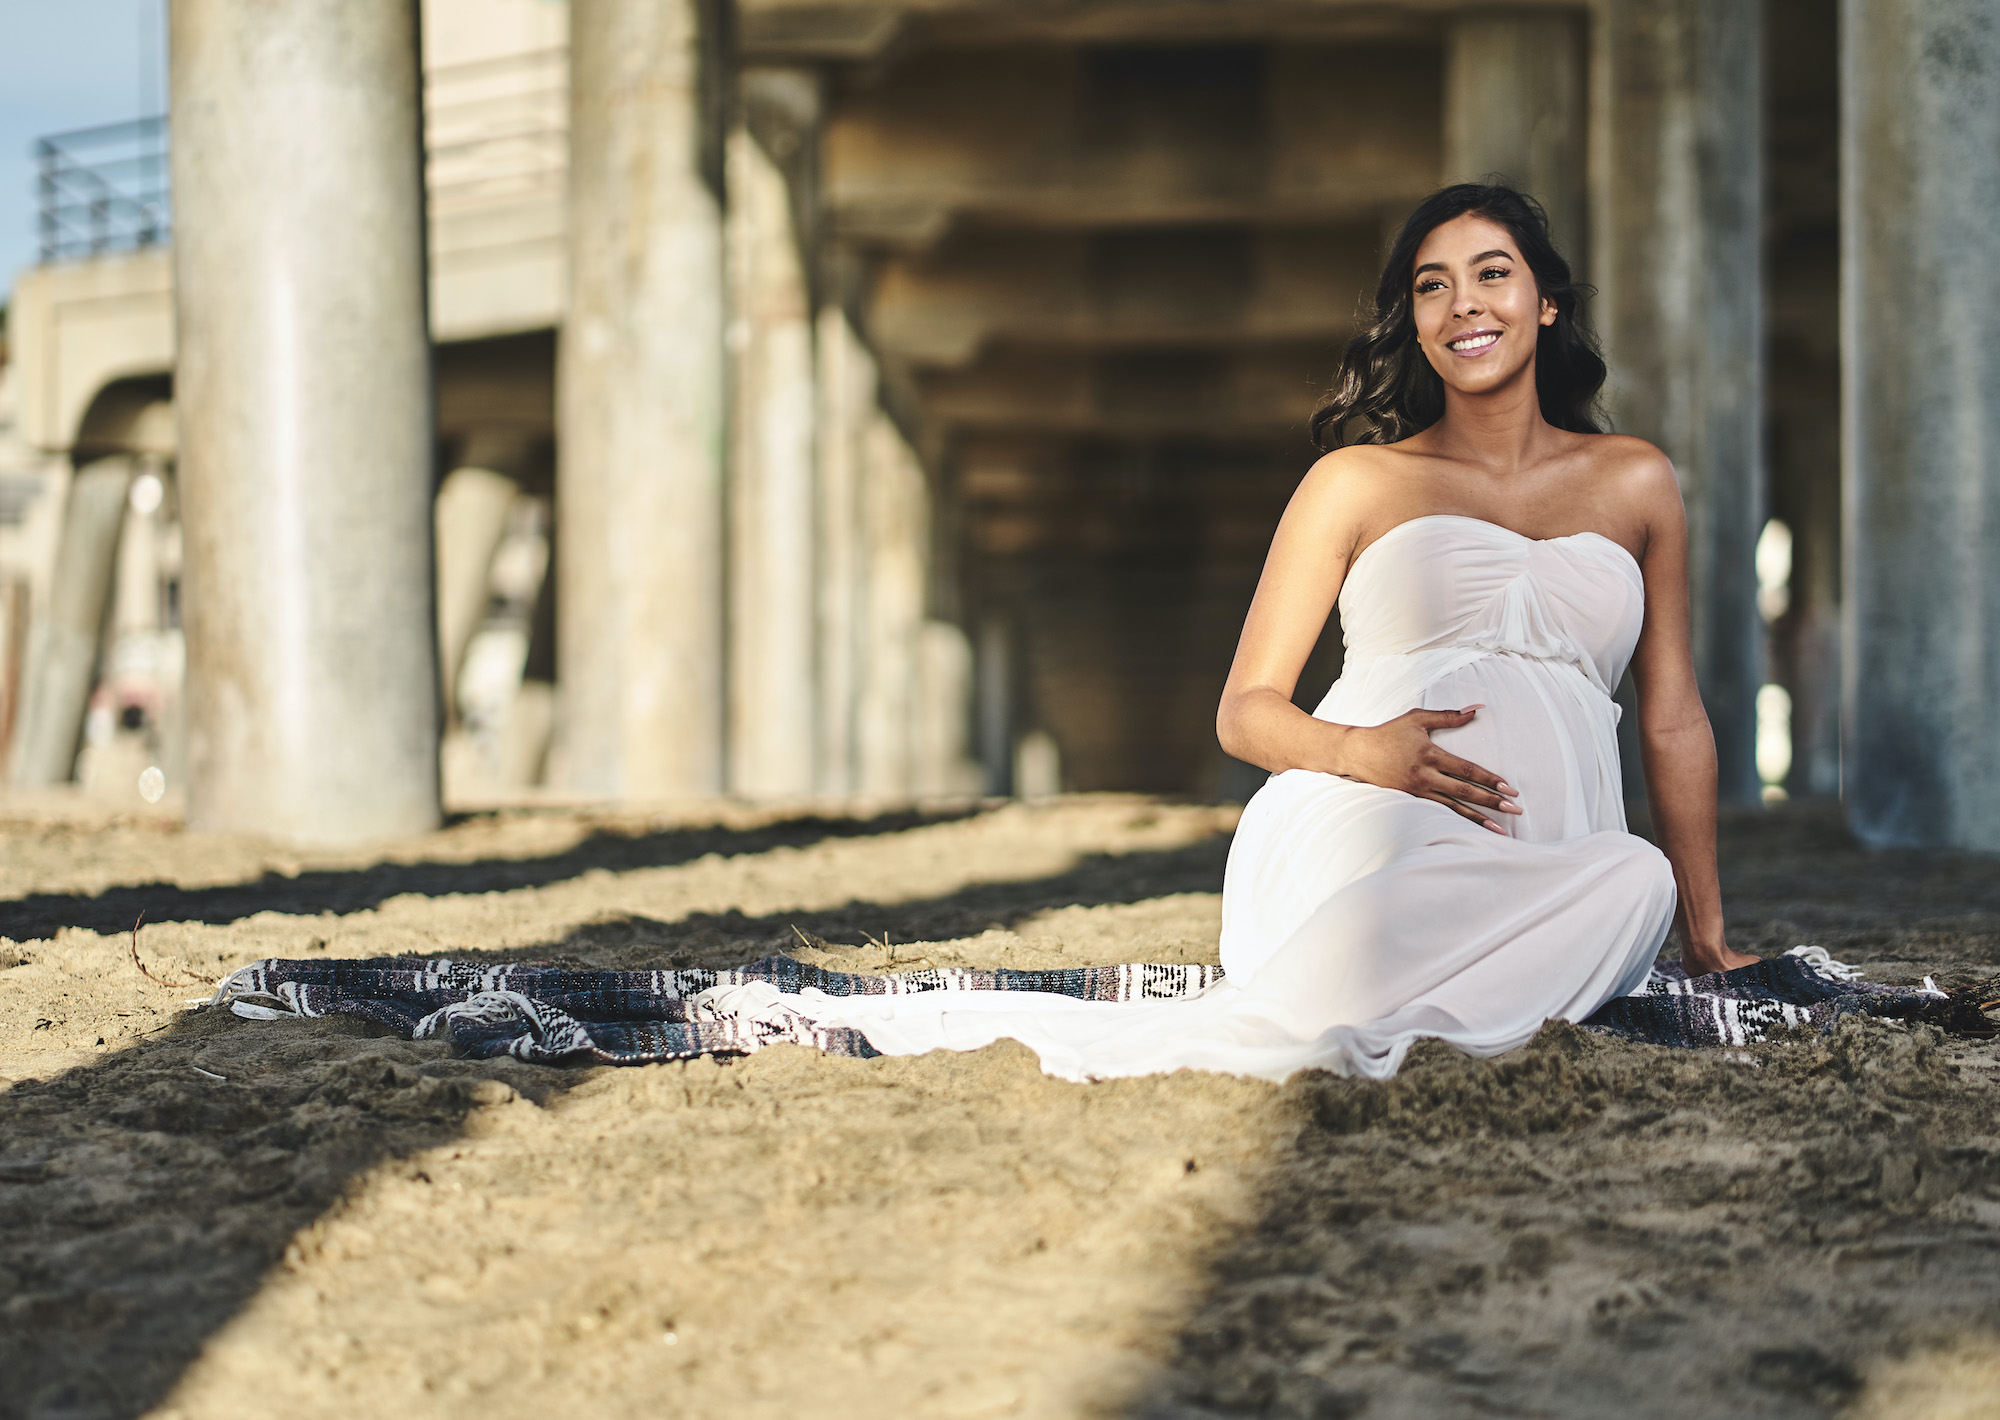 Maternity photography ideas and tips (outdoor and unique)